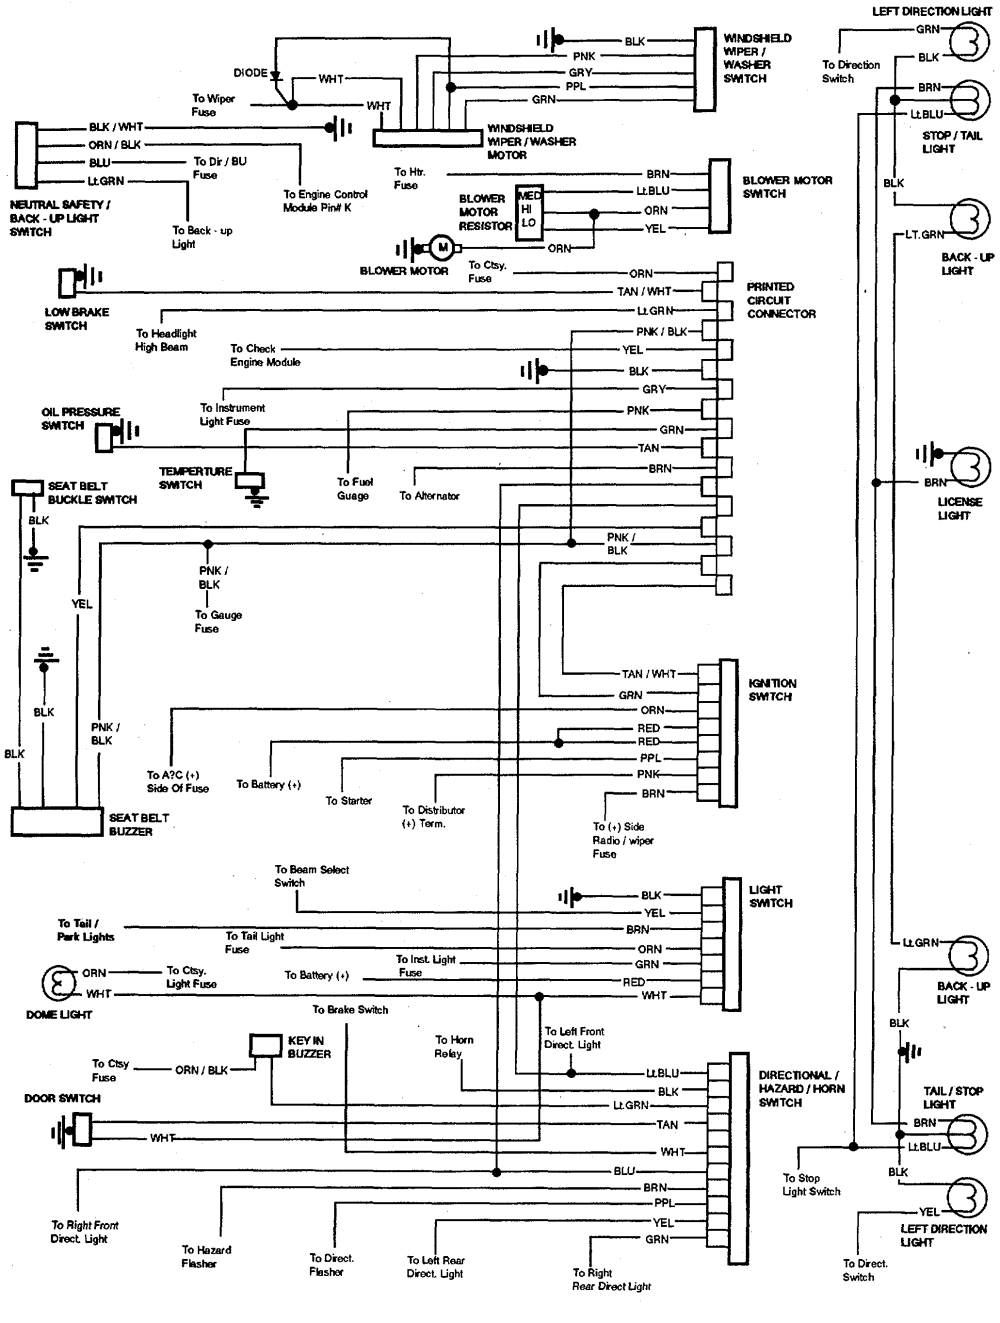 Wiring Diagram For 1986 Monte Carlo Ss - Wiring Diagram